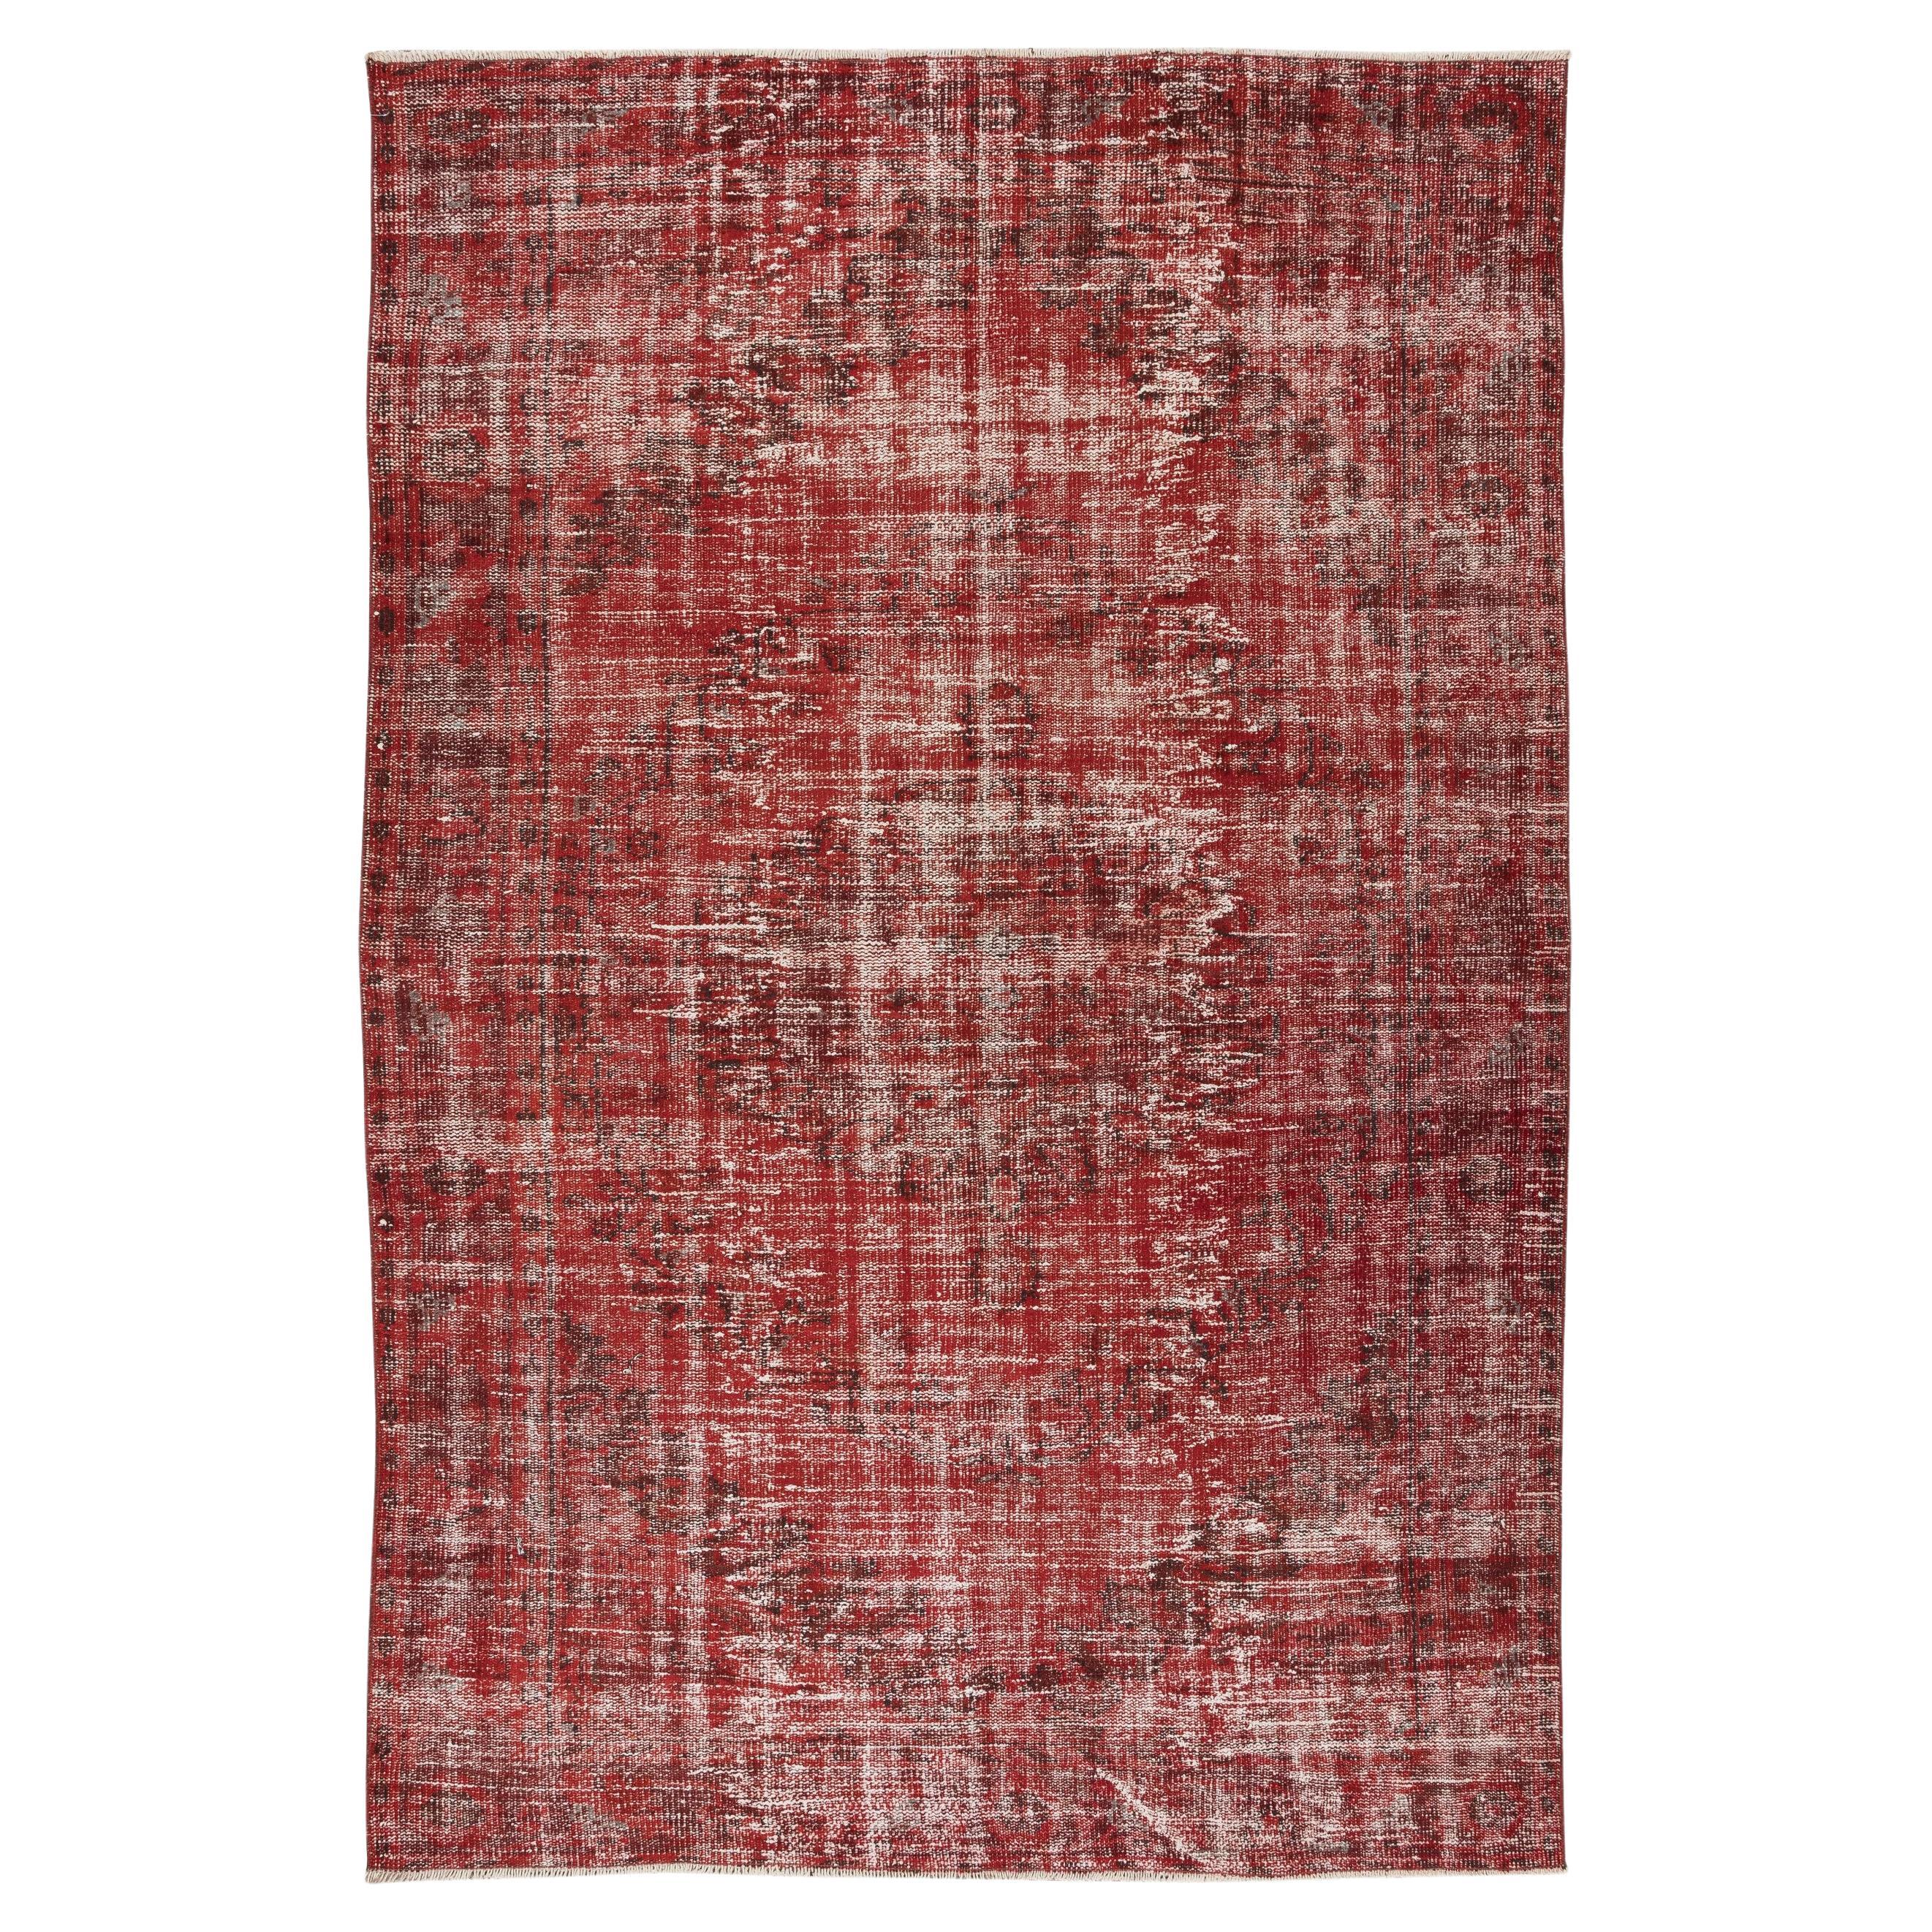 Handmade Shabby Chic Turkish Vintage Wool Area Rug in Burgundy Red For Sale